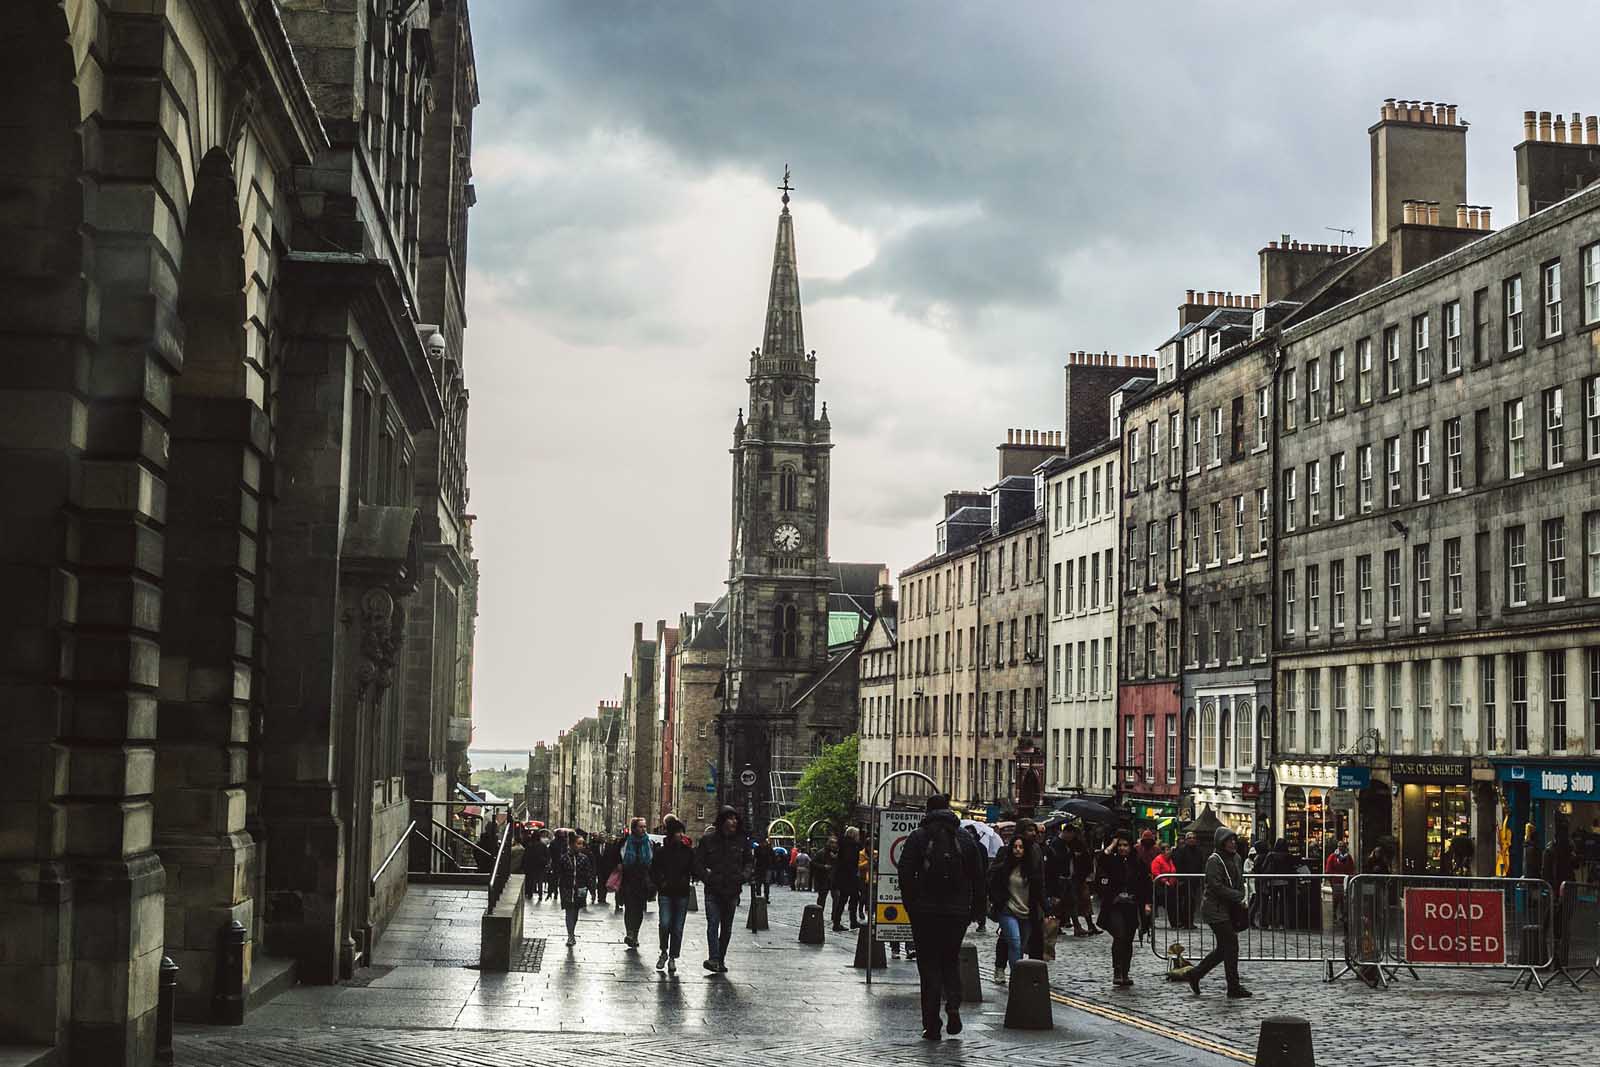 Things to do in Edinburgh The Royal Mile